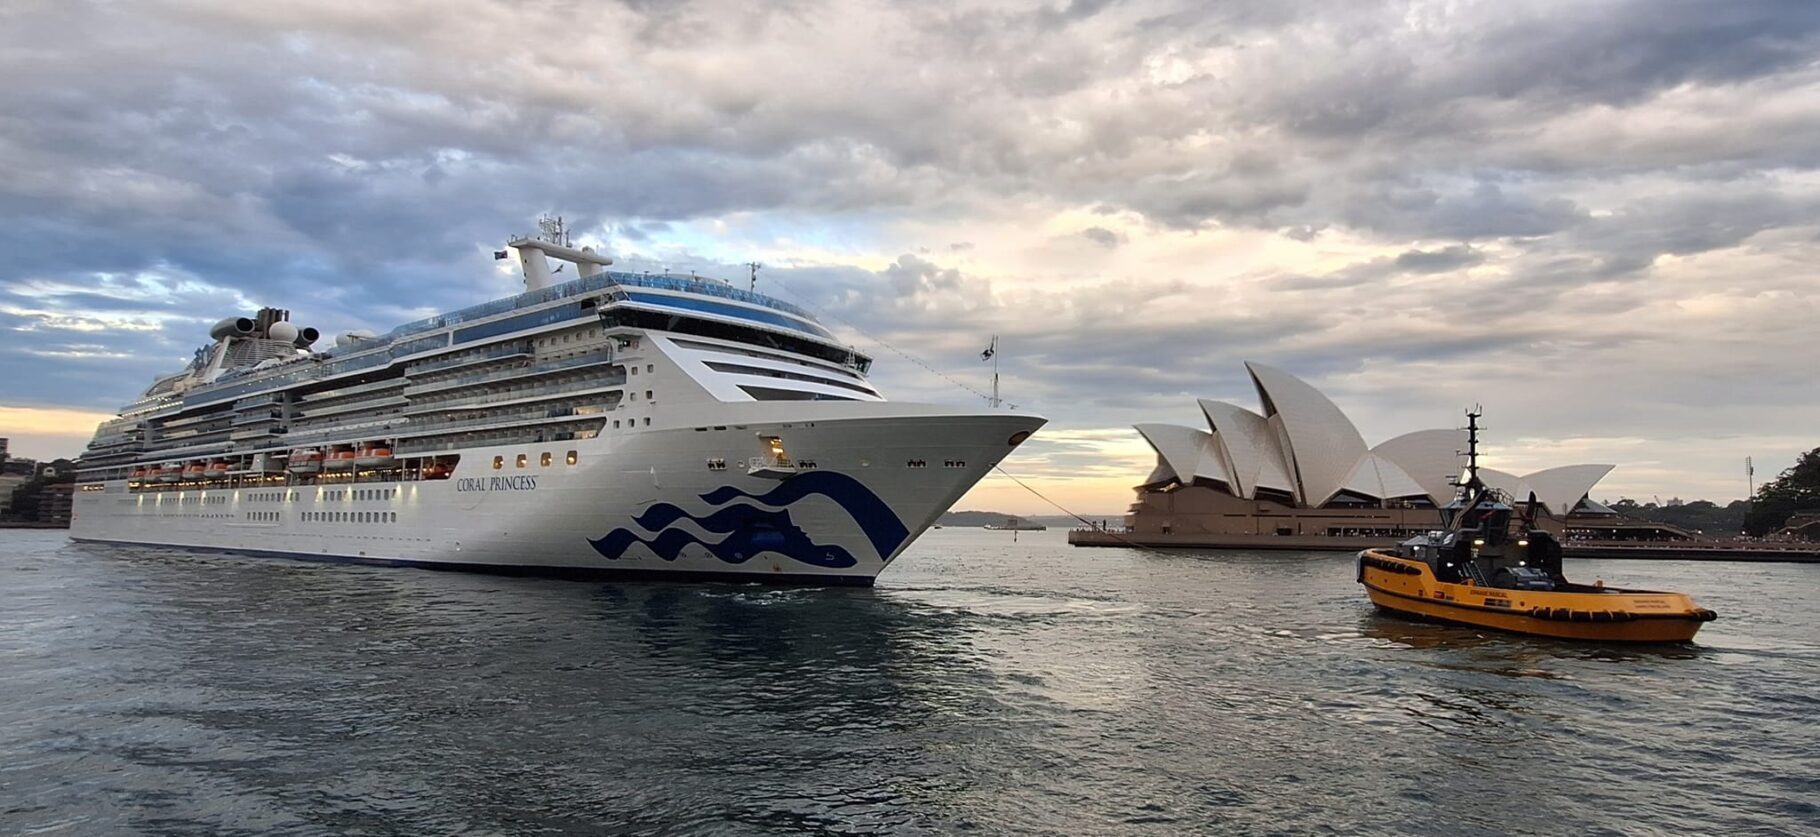 Coral Princess in Sydney with the Sydney Opera House in the background.